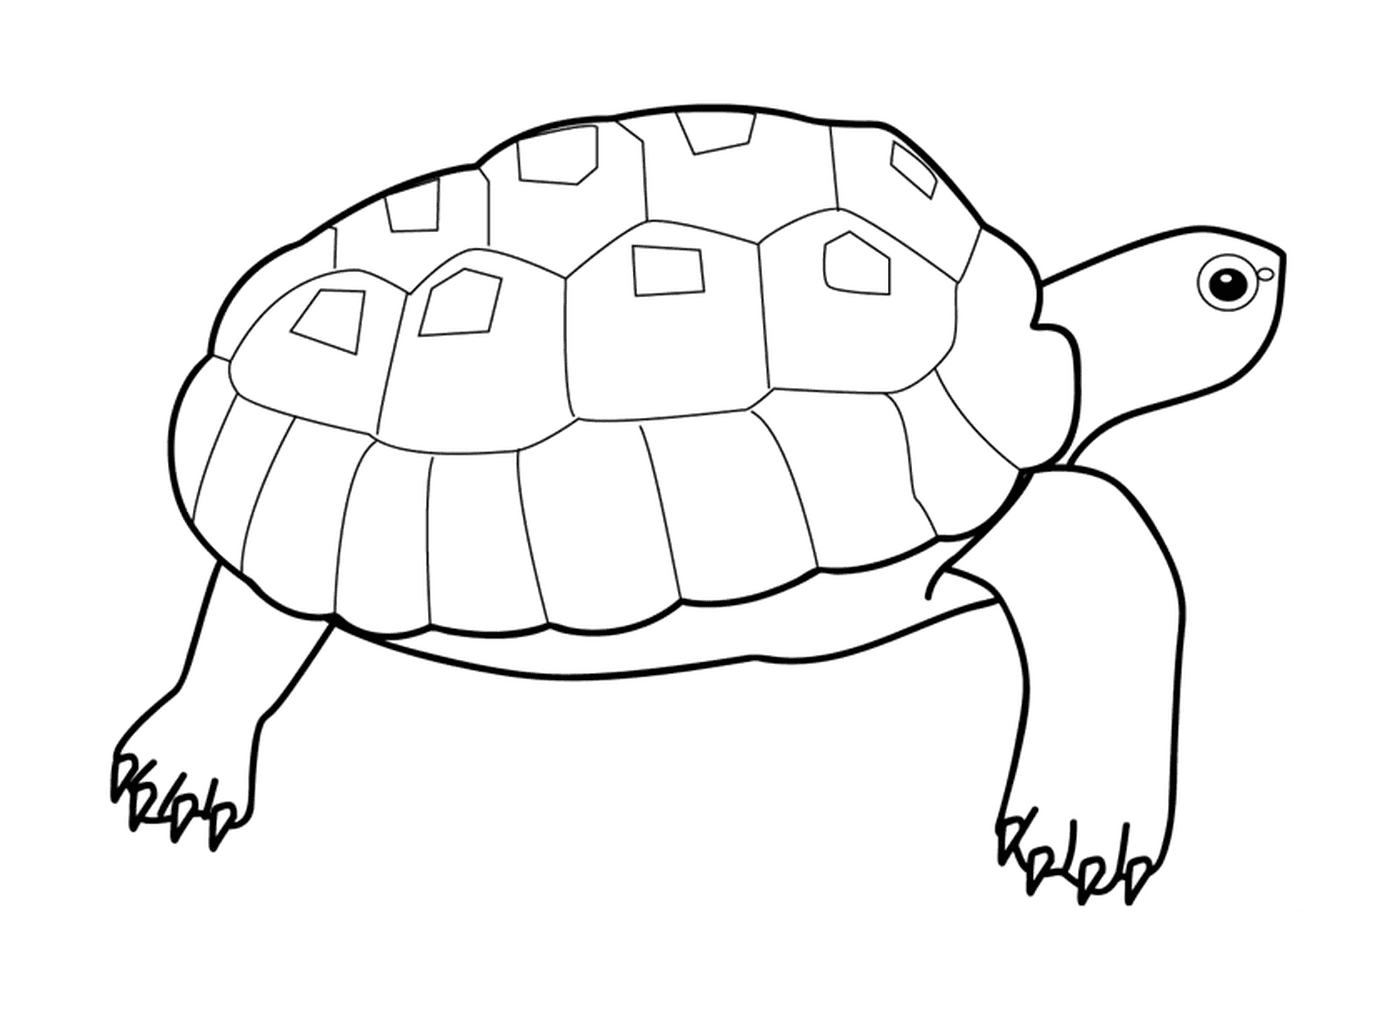  A turtle 